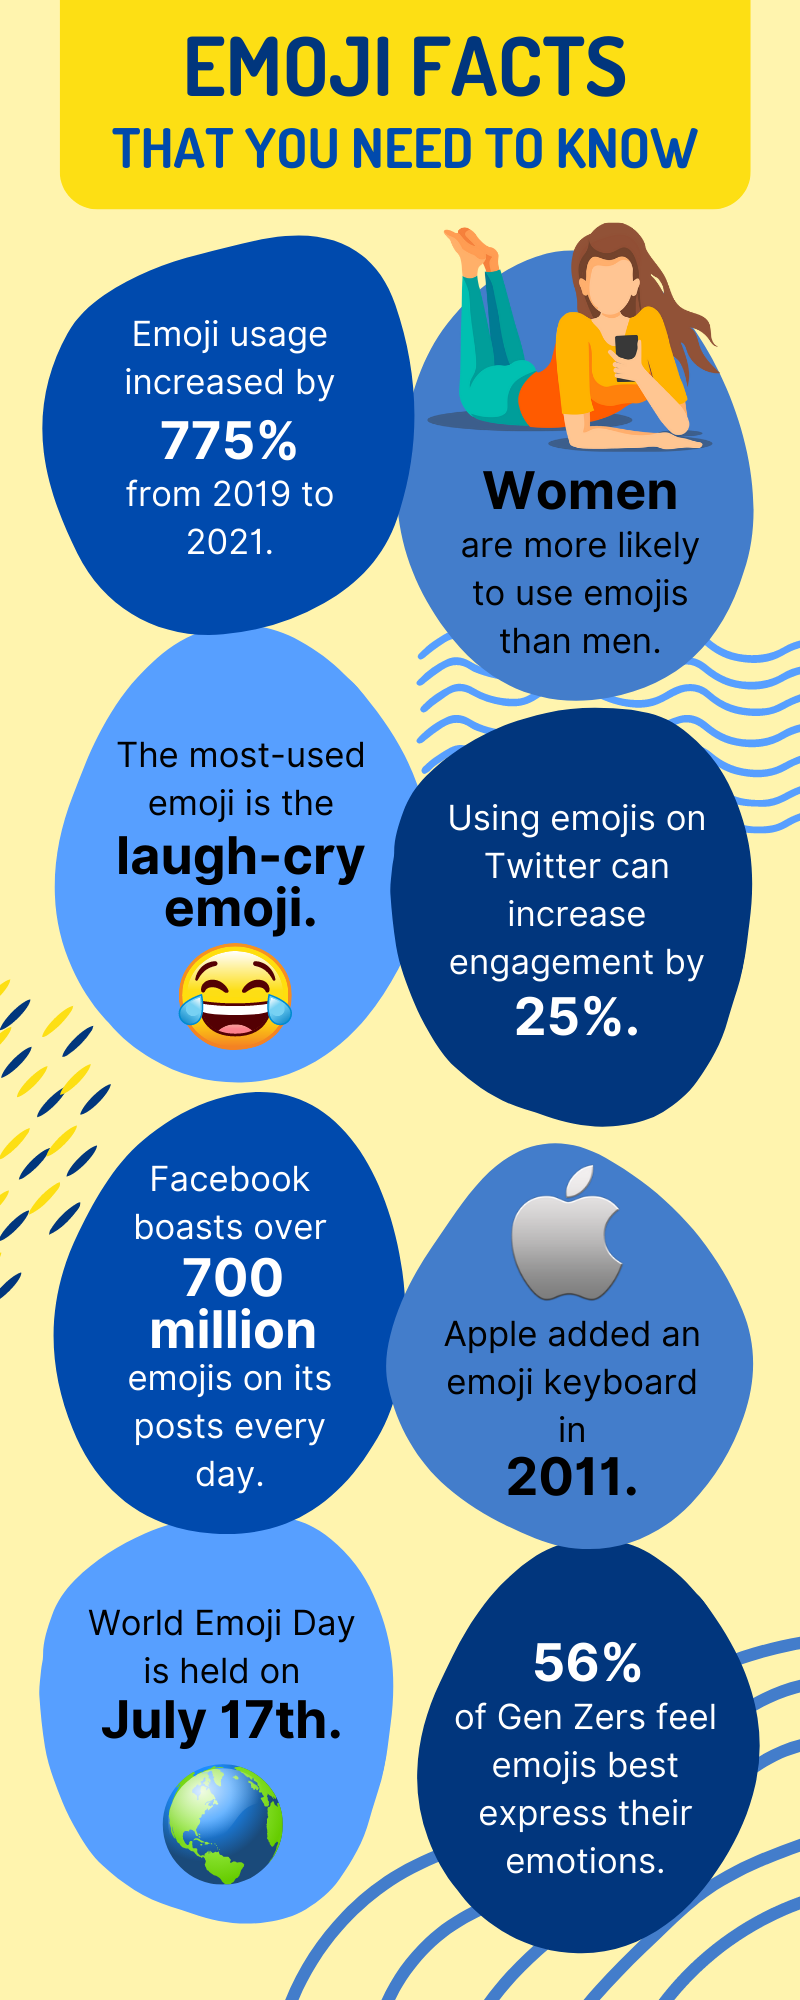 Emoji Facts That You Need to Know